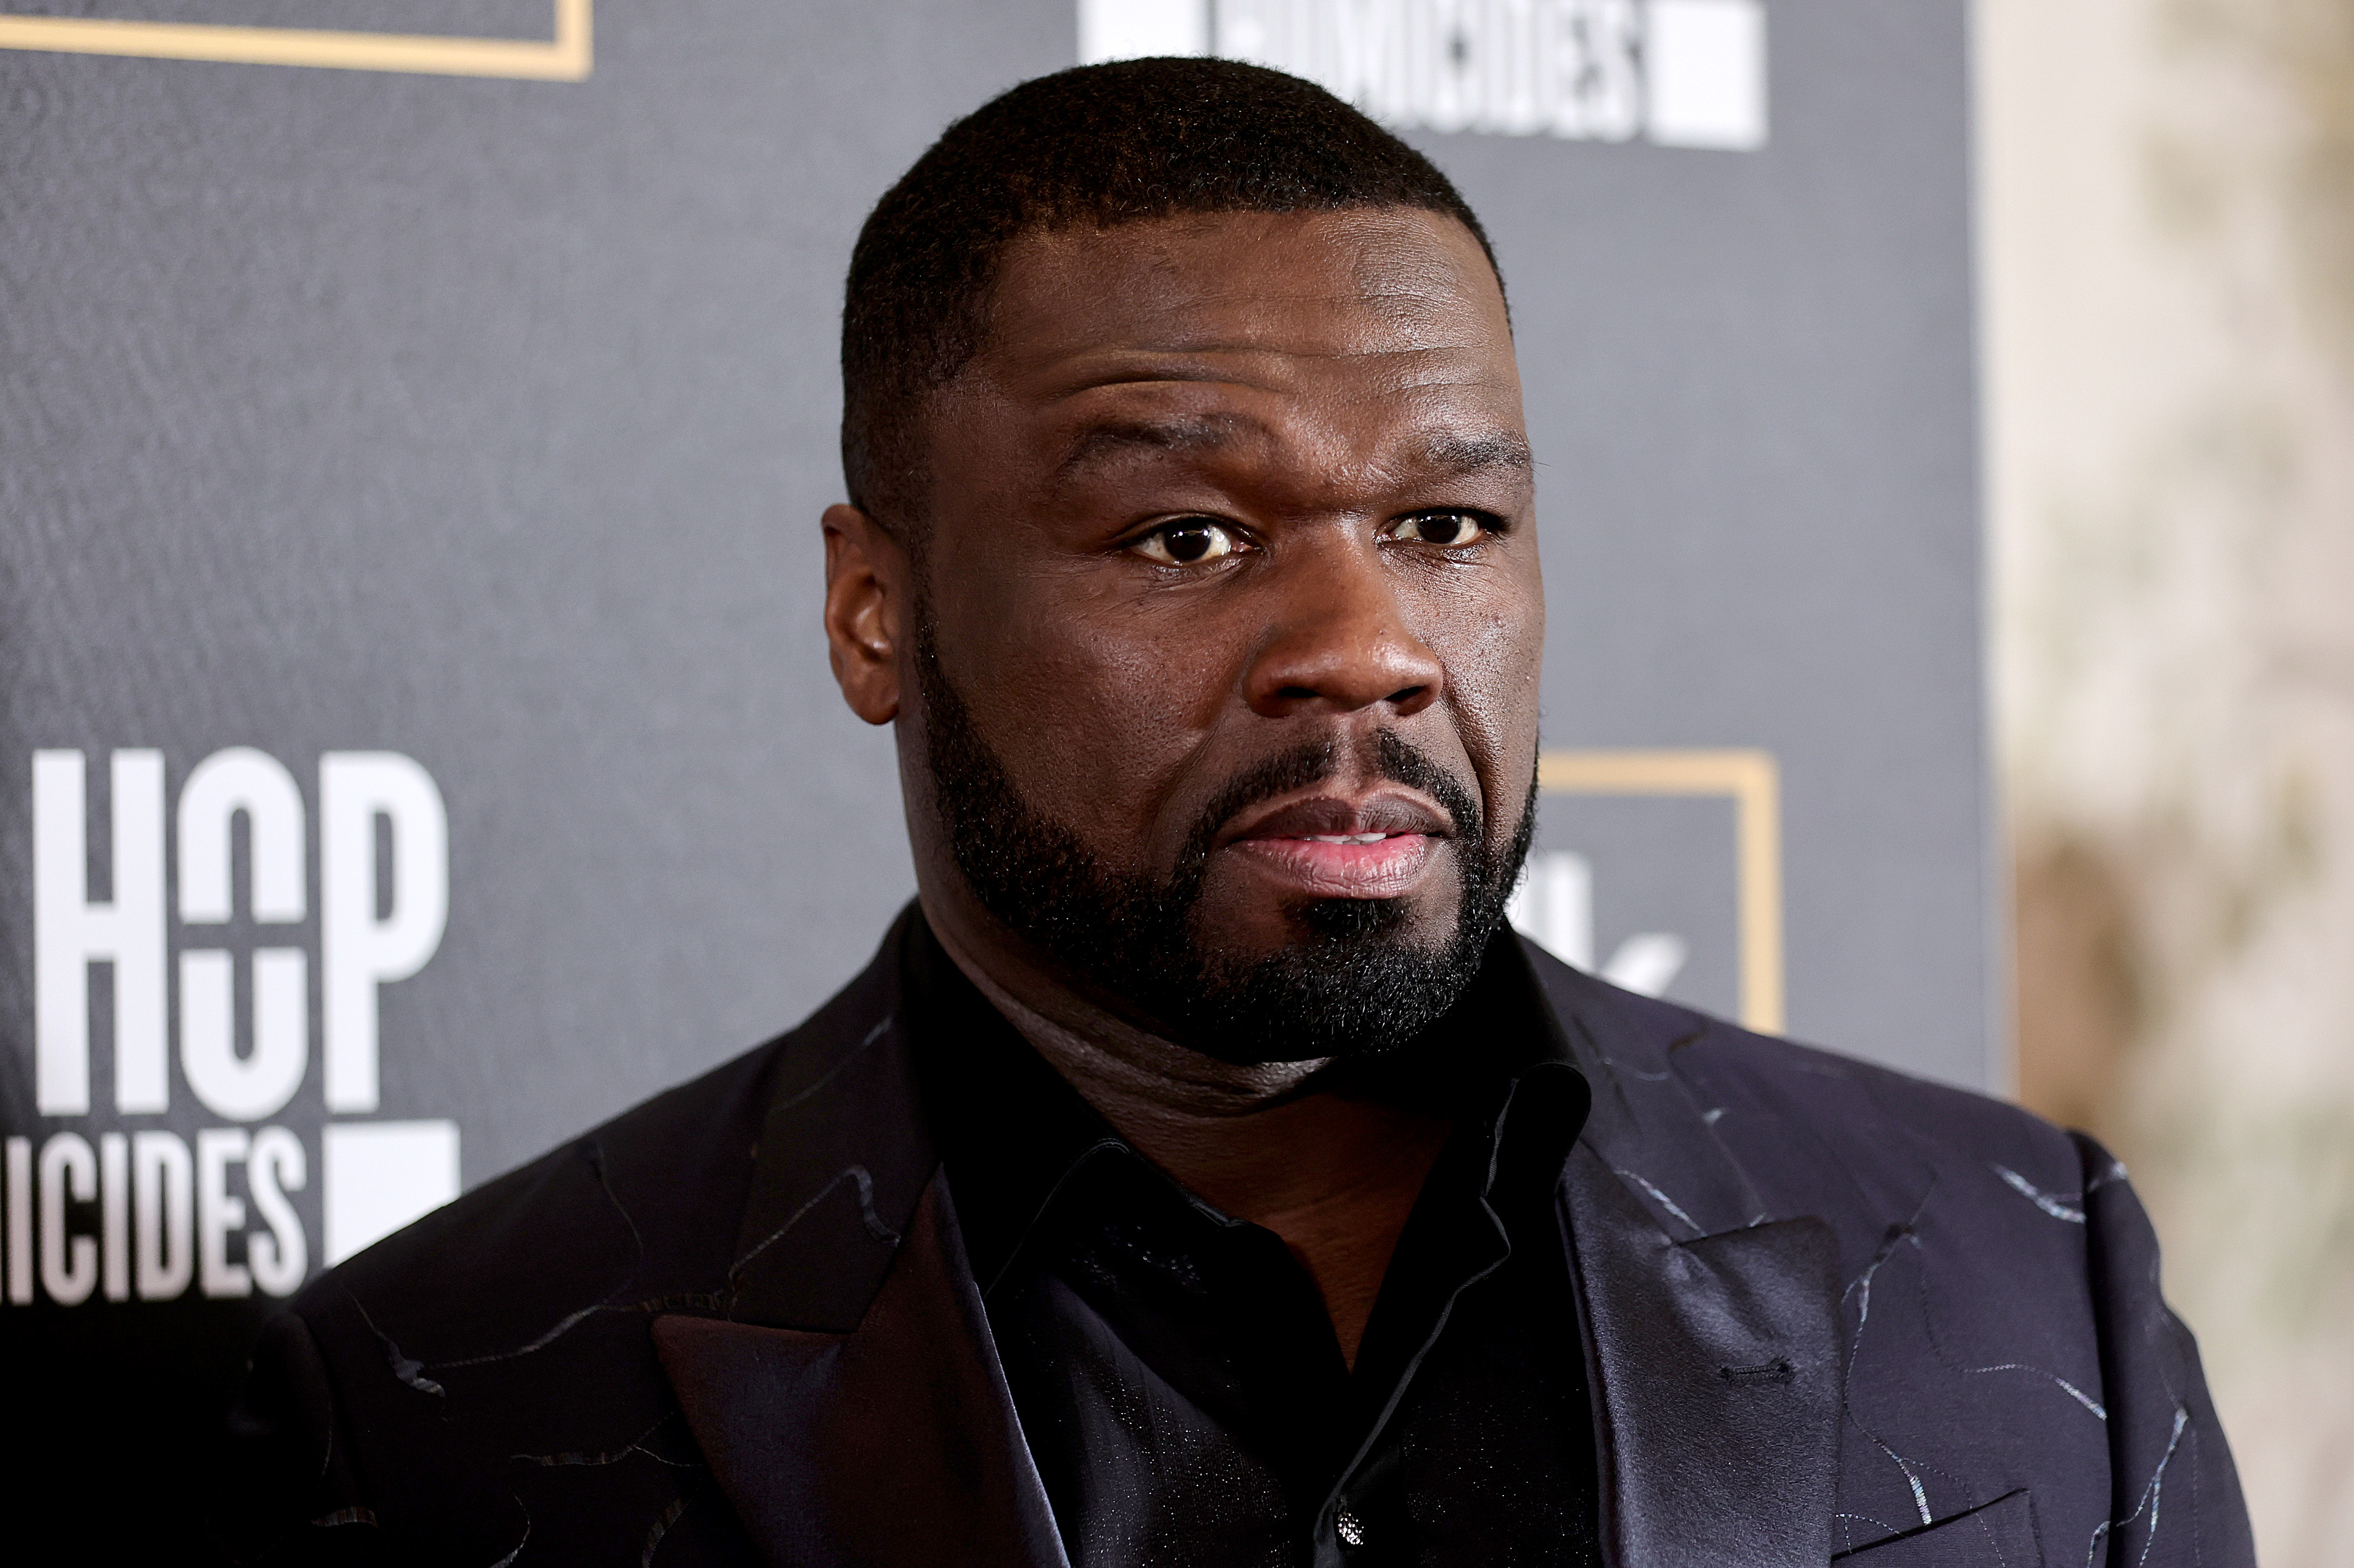 50 the Philanthropist - - Image 1 from Out and About: 50 Cent